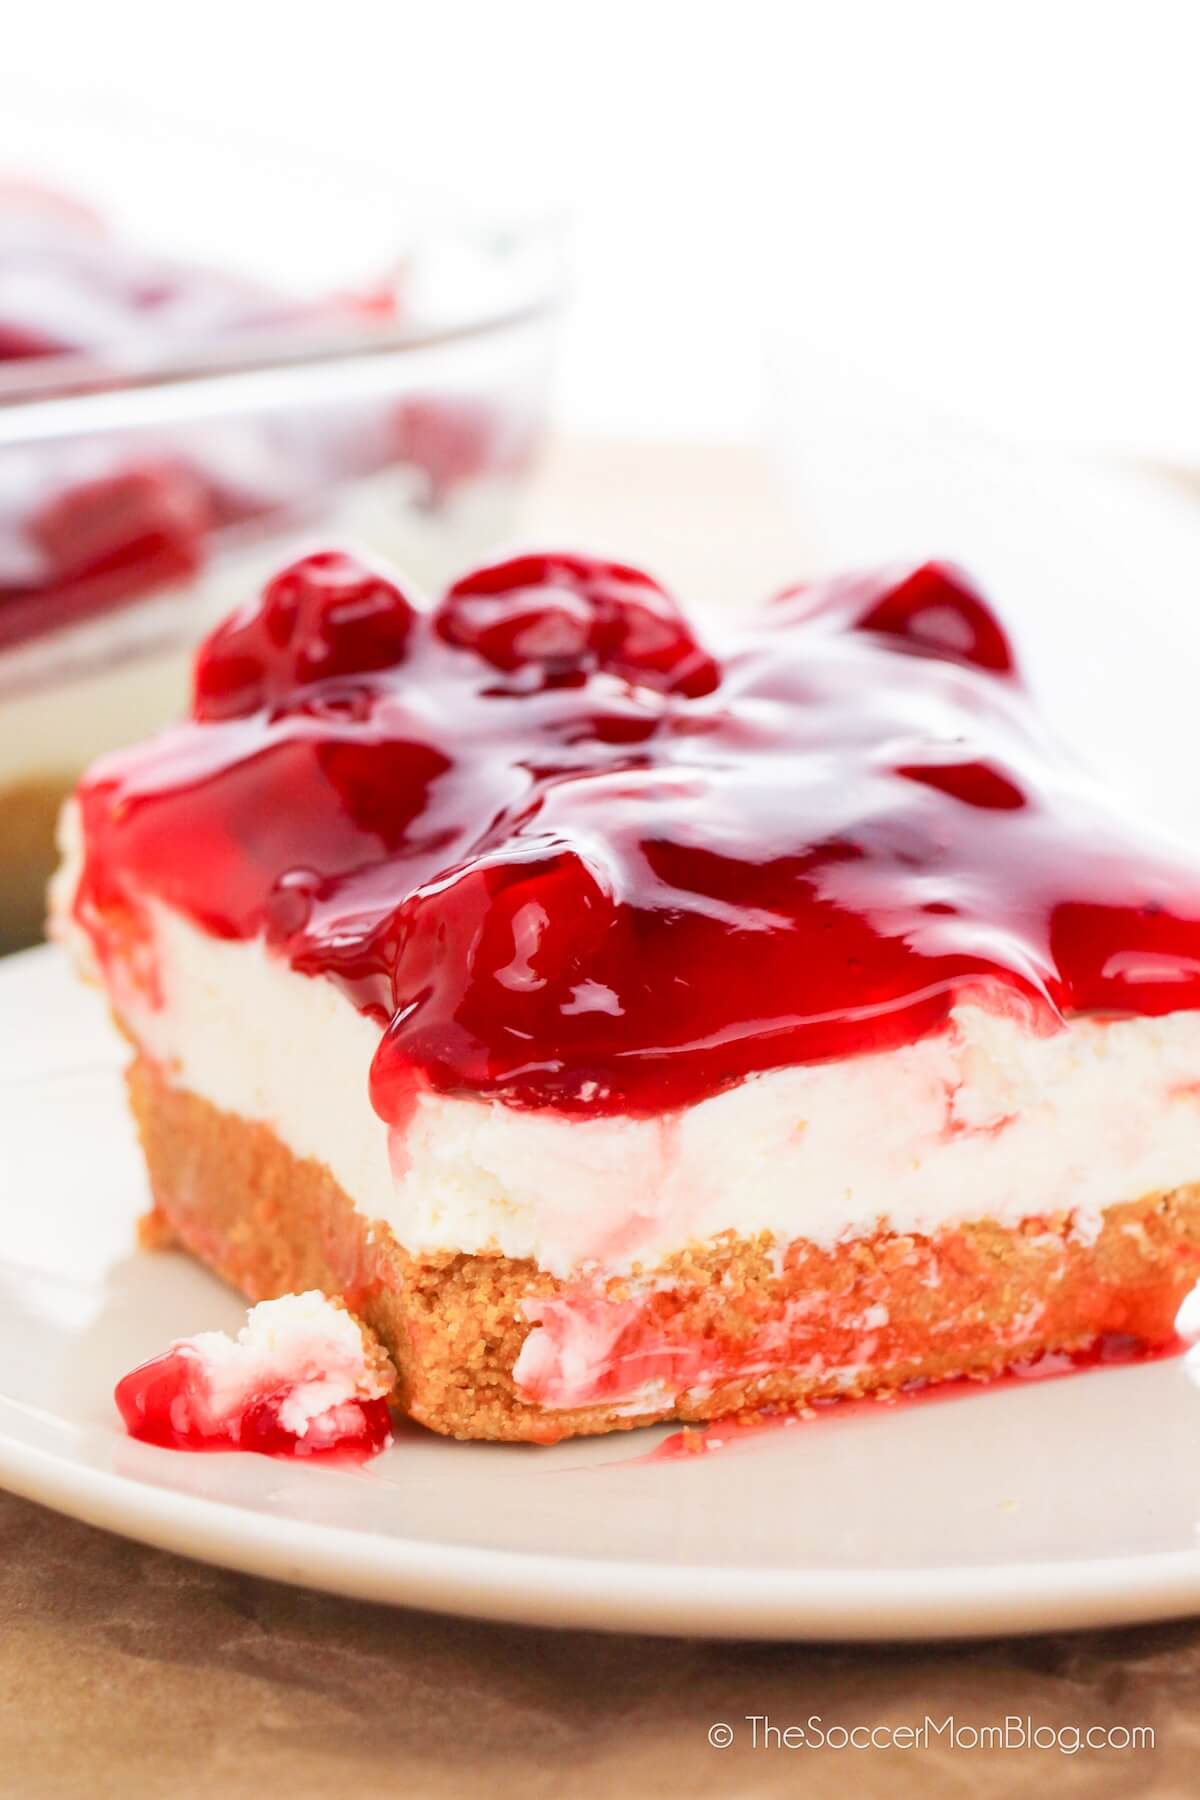 Completed No Bake Cherry Cheesecake